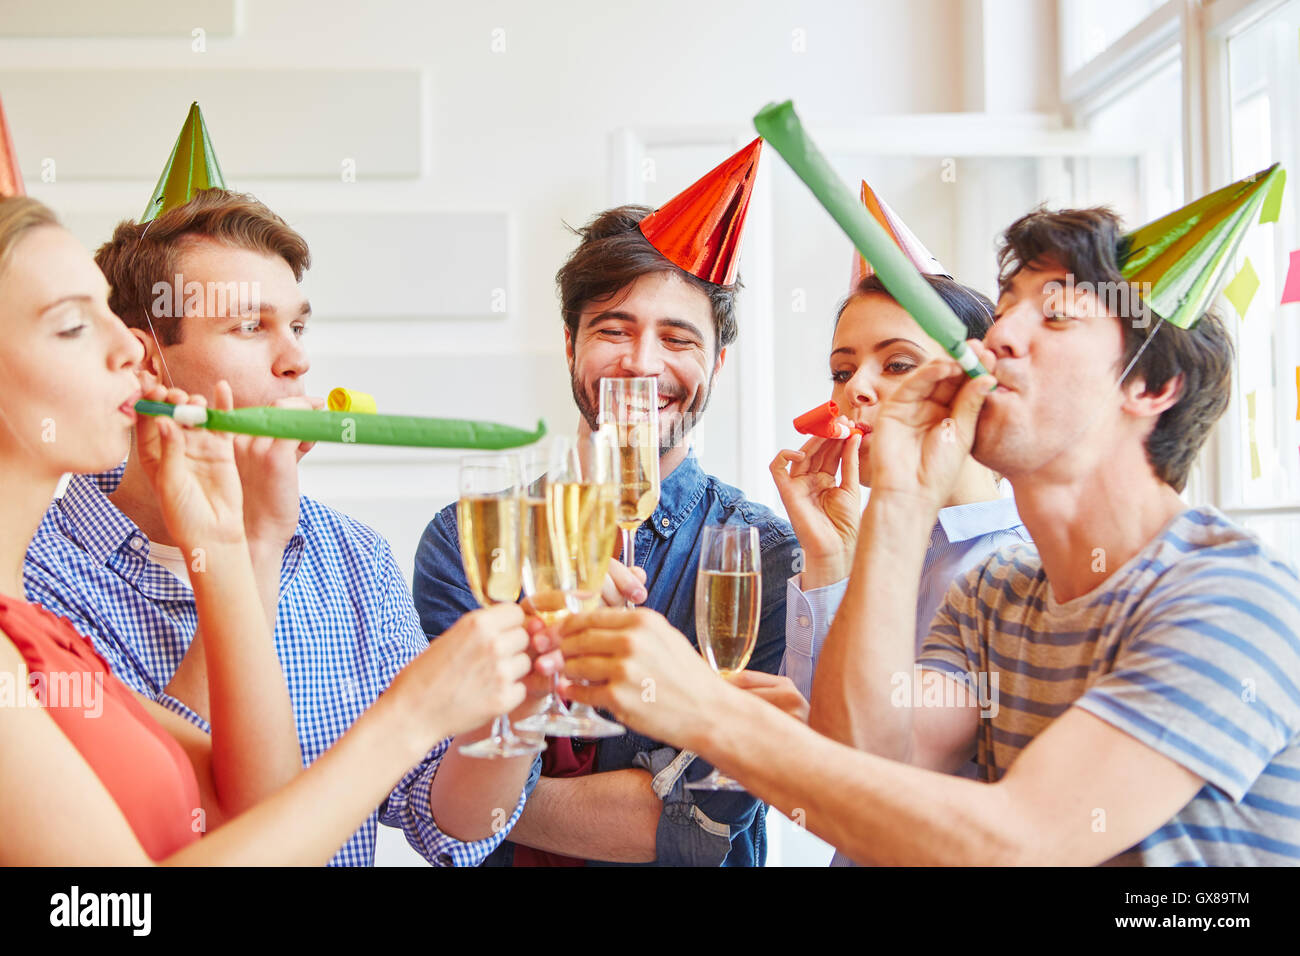 Students having fun at a party with sect Stock Photo